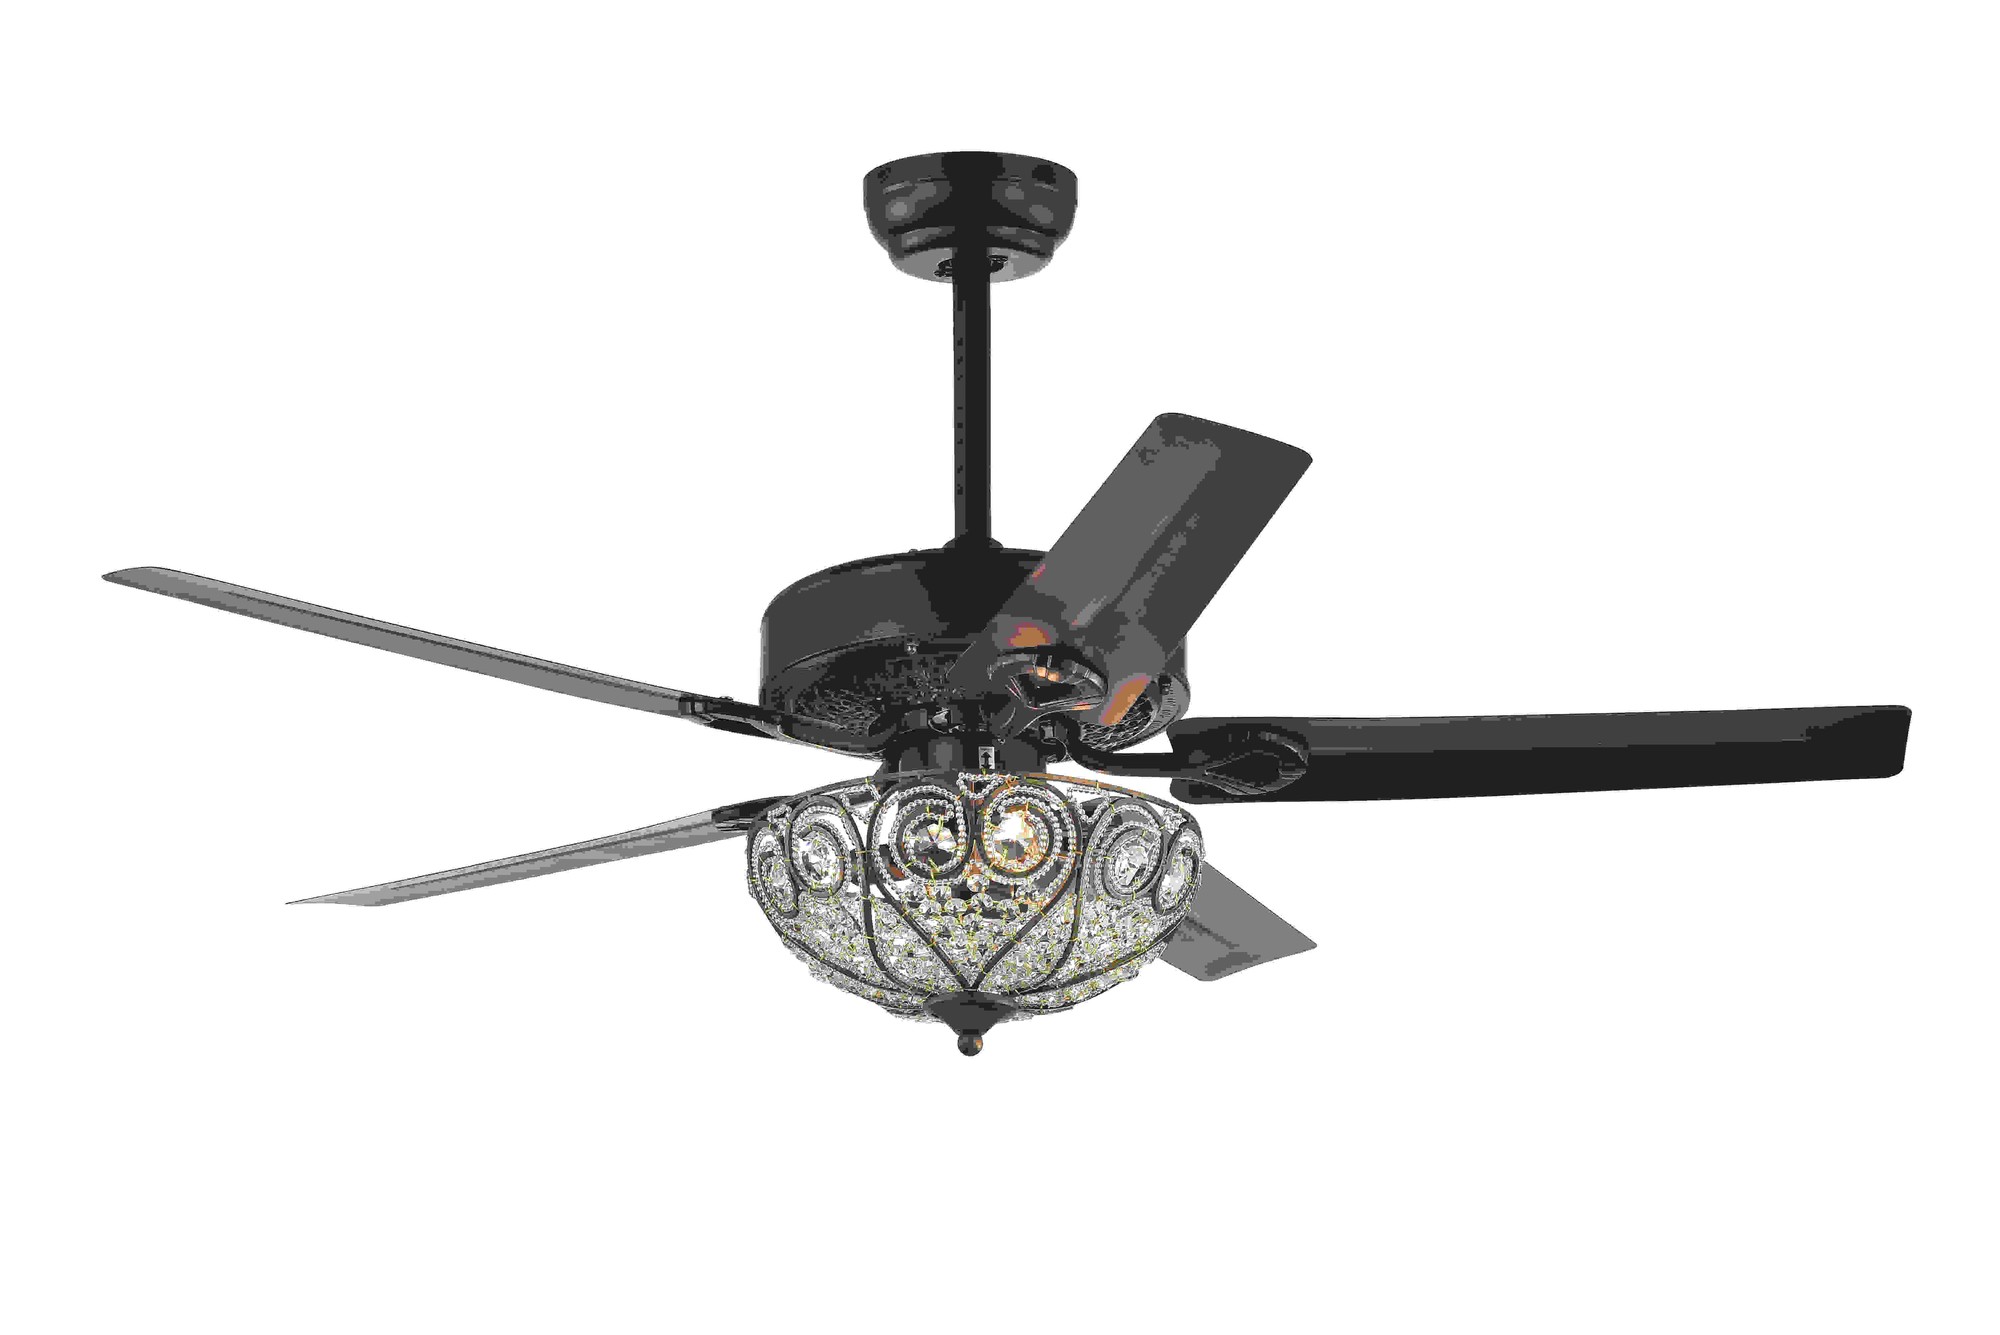 Catalina Bronze 5-blade 48-inch Crystal Ceiling Fan (Optional Remote)